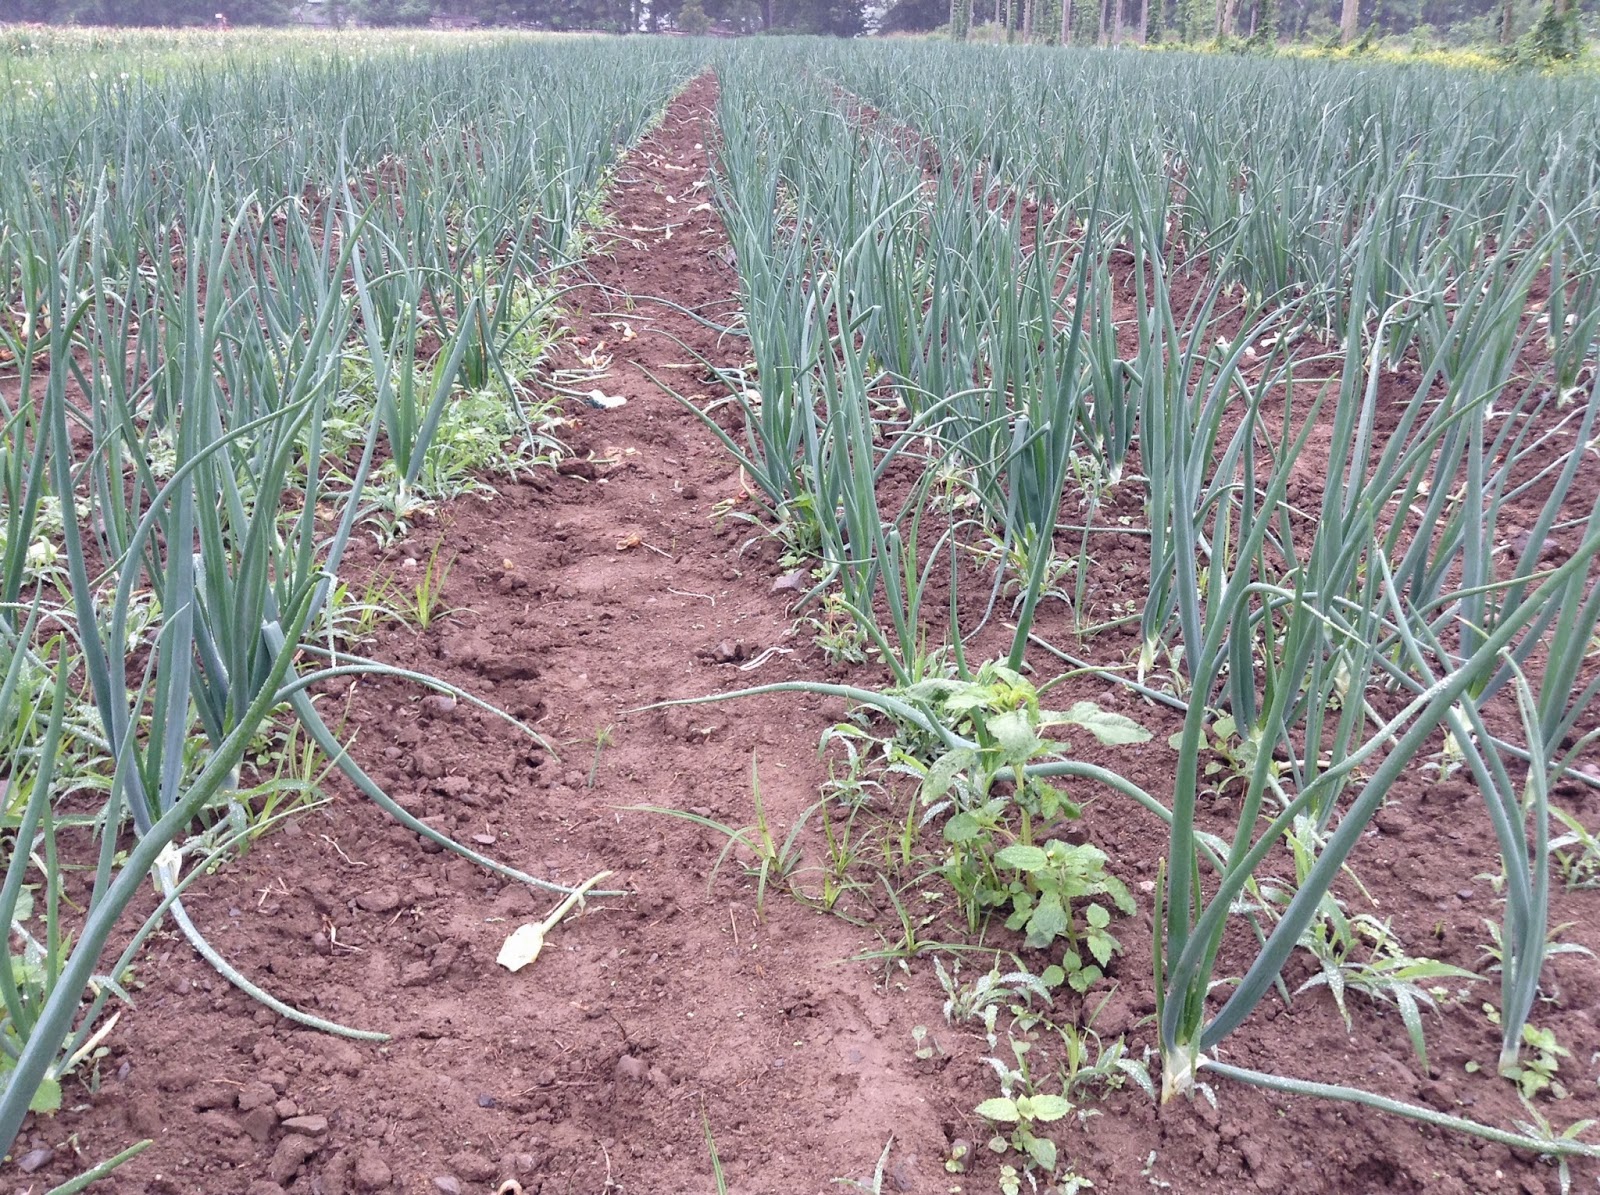 Spring Onions in the field